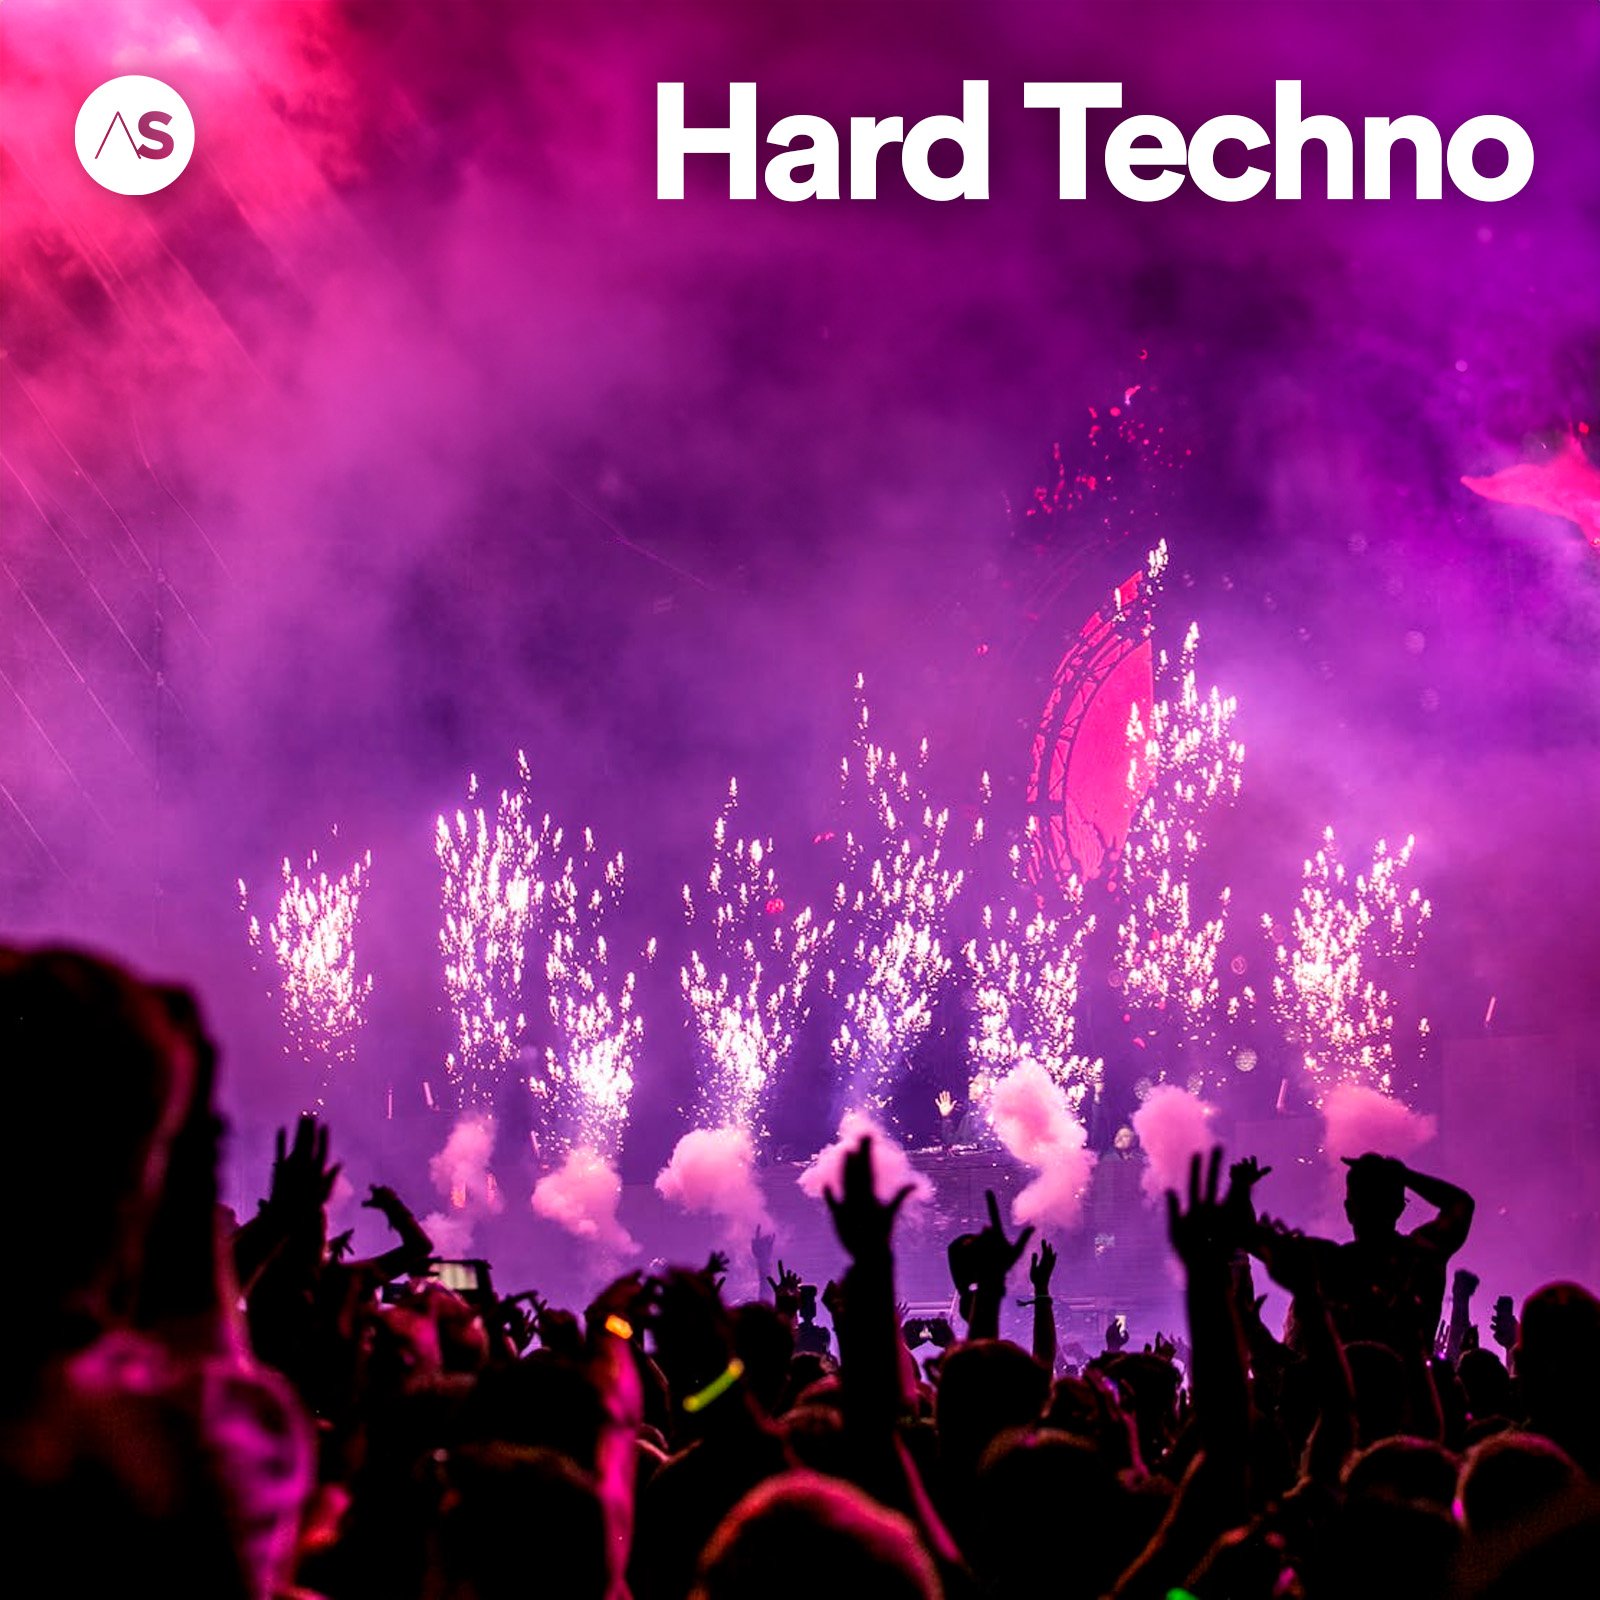 Get ready to feel the intensity with our Hard Techno, Hard House, and Hard Style playlist! This collection is designed to push your limits and keep your adrenaline pumping.